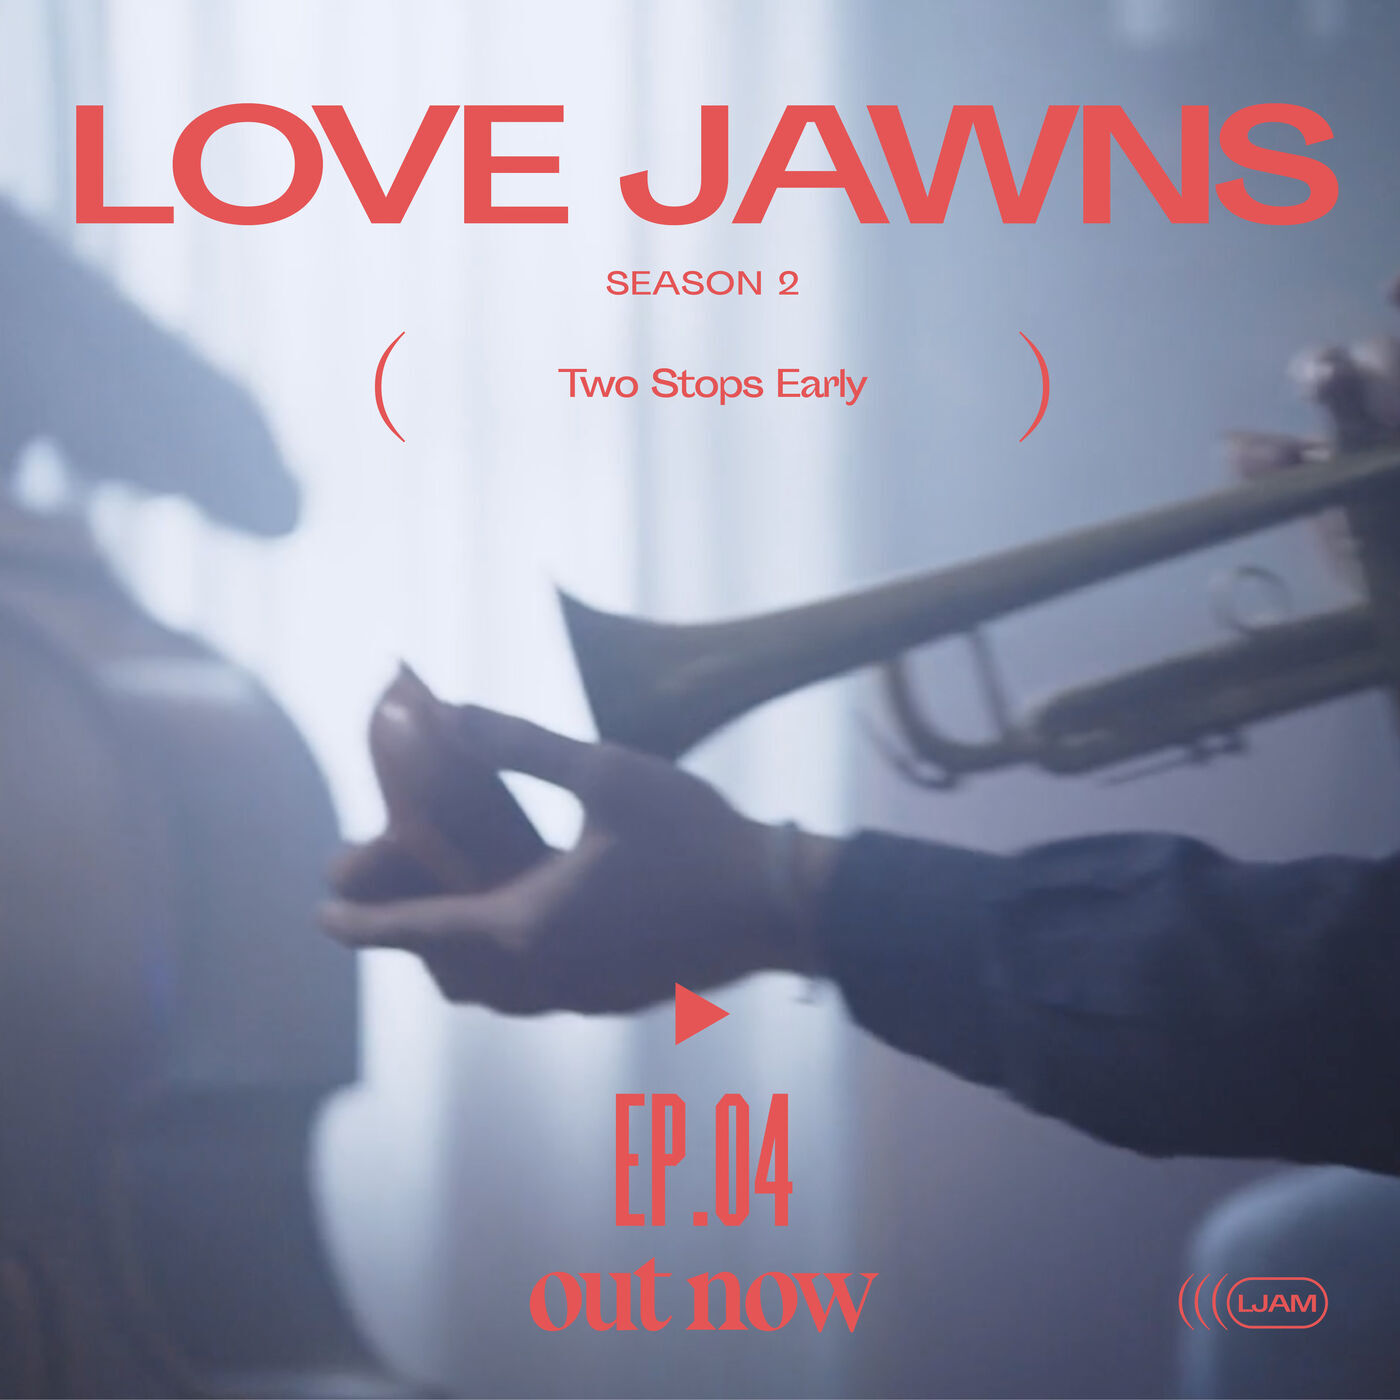 A Love Jawns playlist cover that says "Love Jawns Season 2 Two Stops Early, Ep.04 out now"